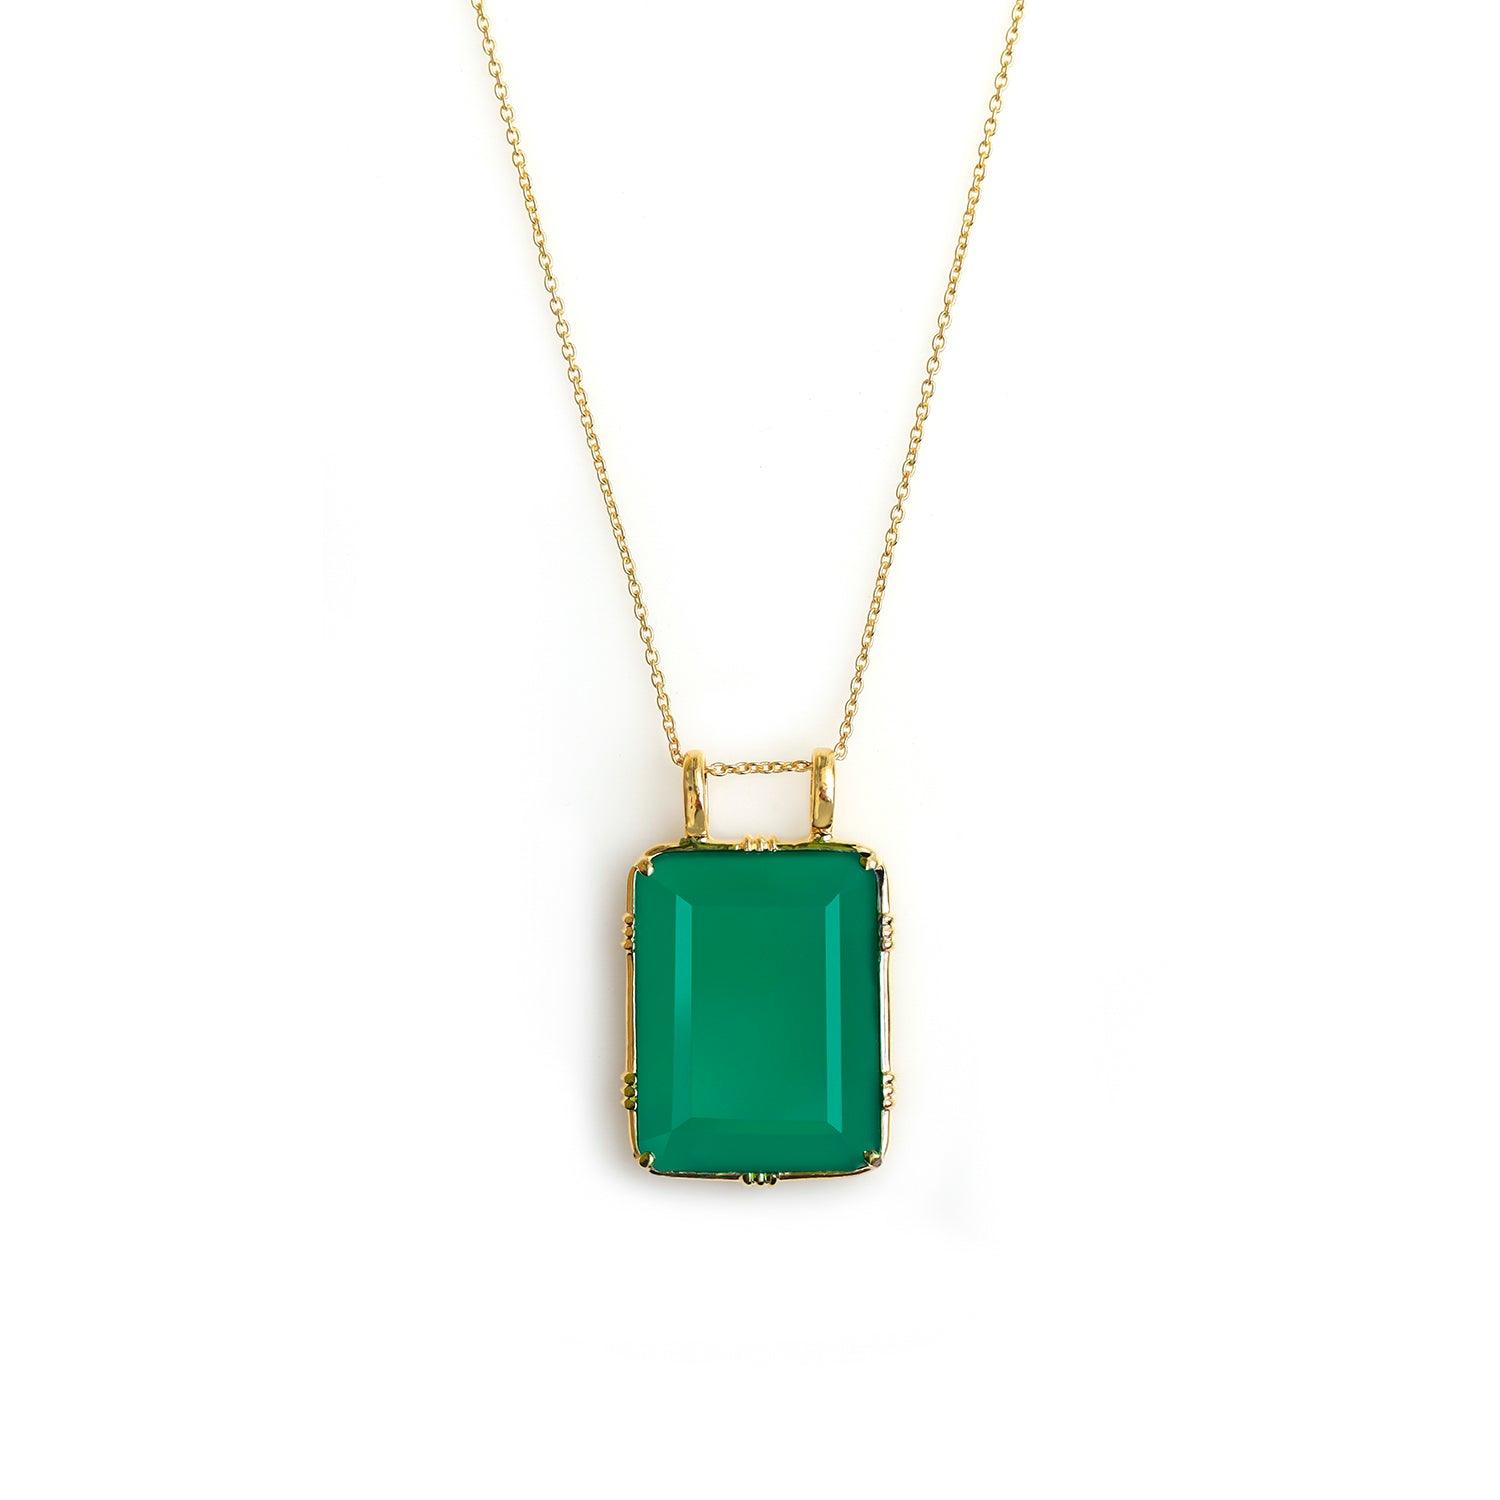 Green Onyx Necklace 14kt Gold Over 925 Silver Chain Pendant Necklace Jewelry - YoTreasure